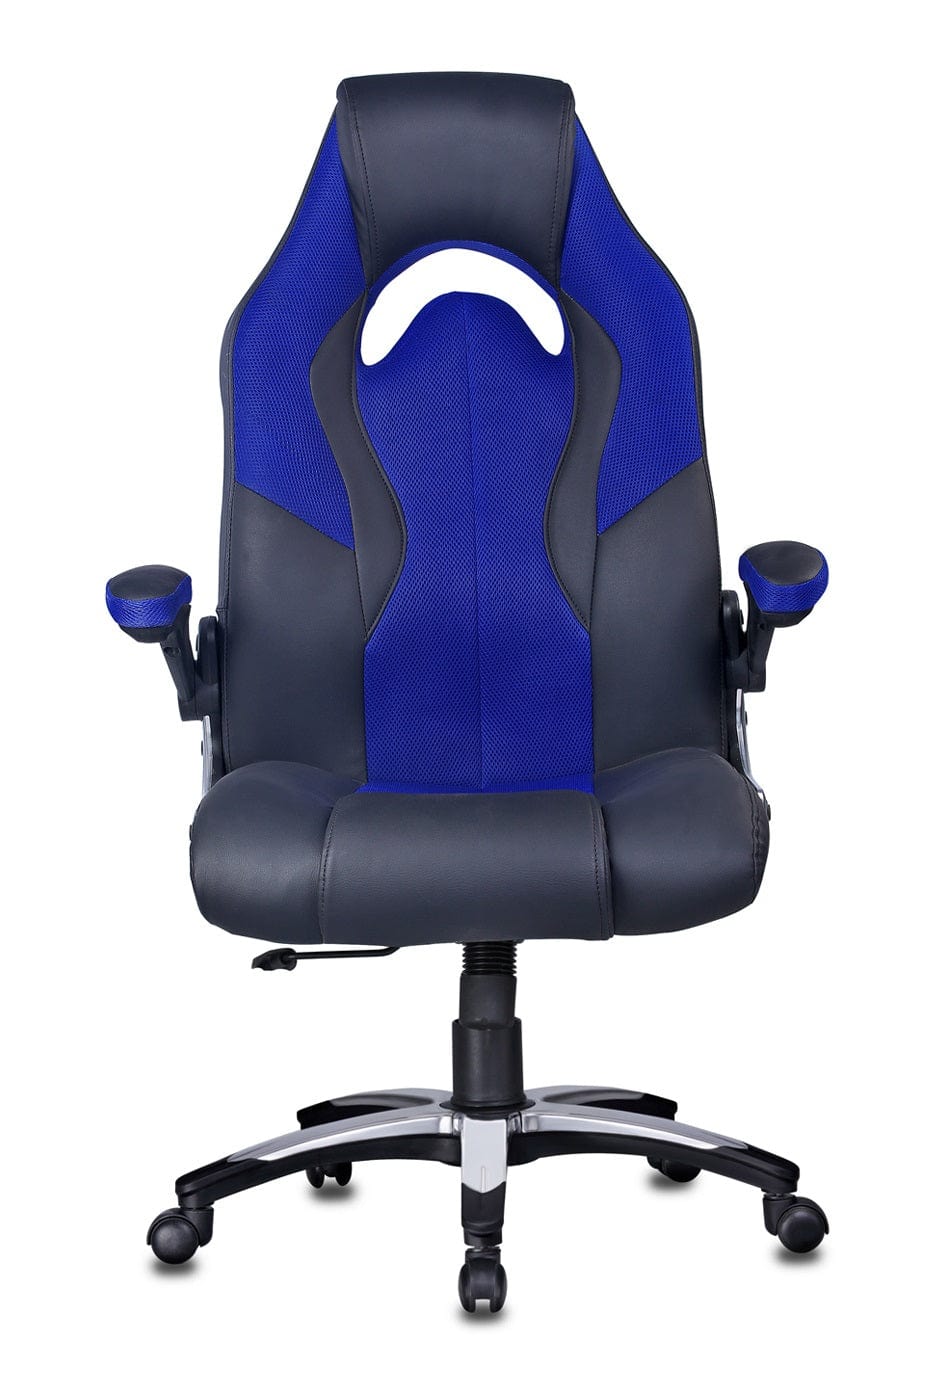 Stylish Gaming chair in Black/Blue